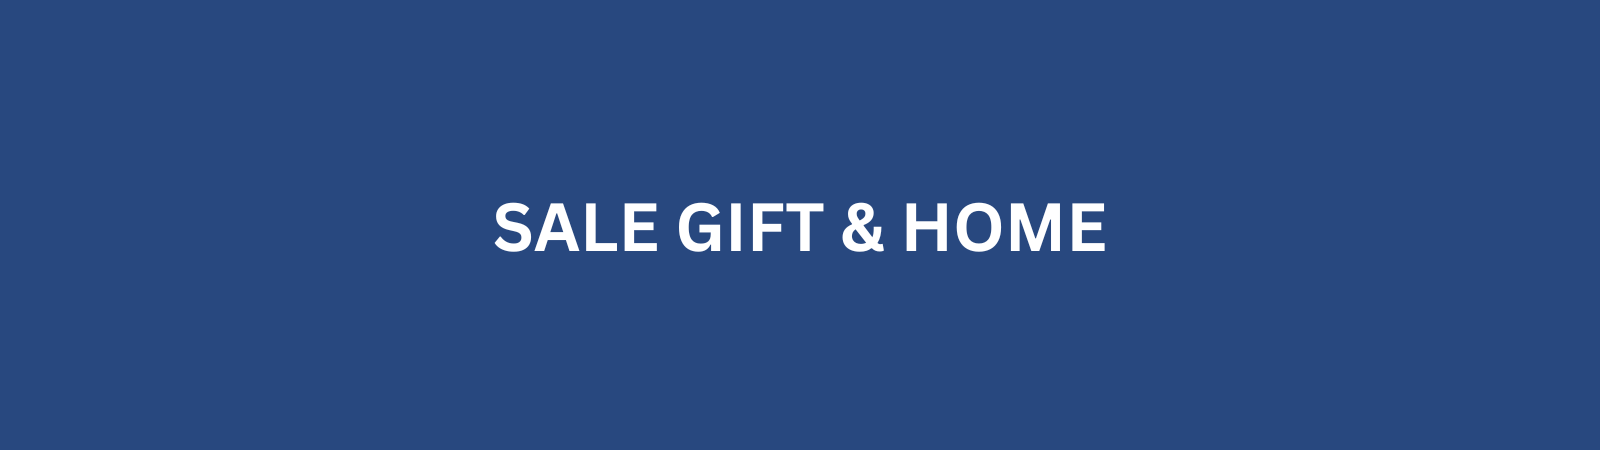 Sale Gifts & Home